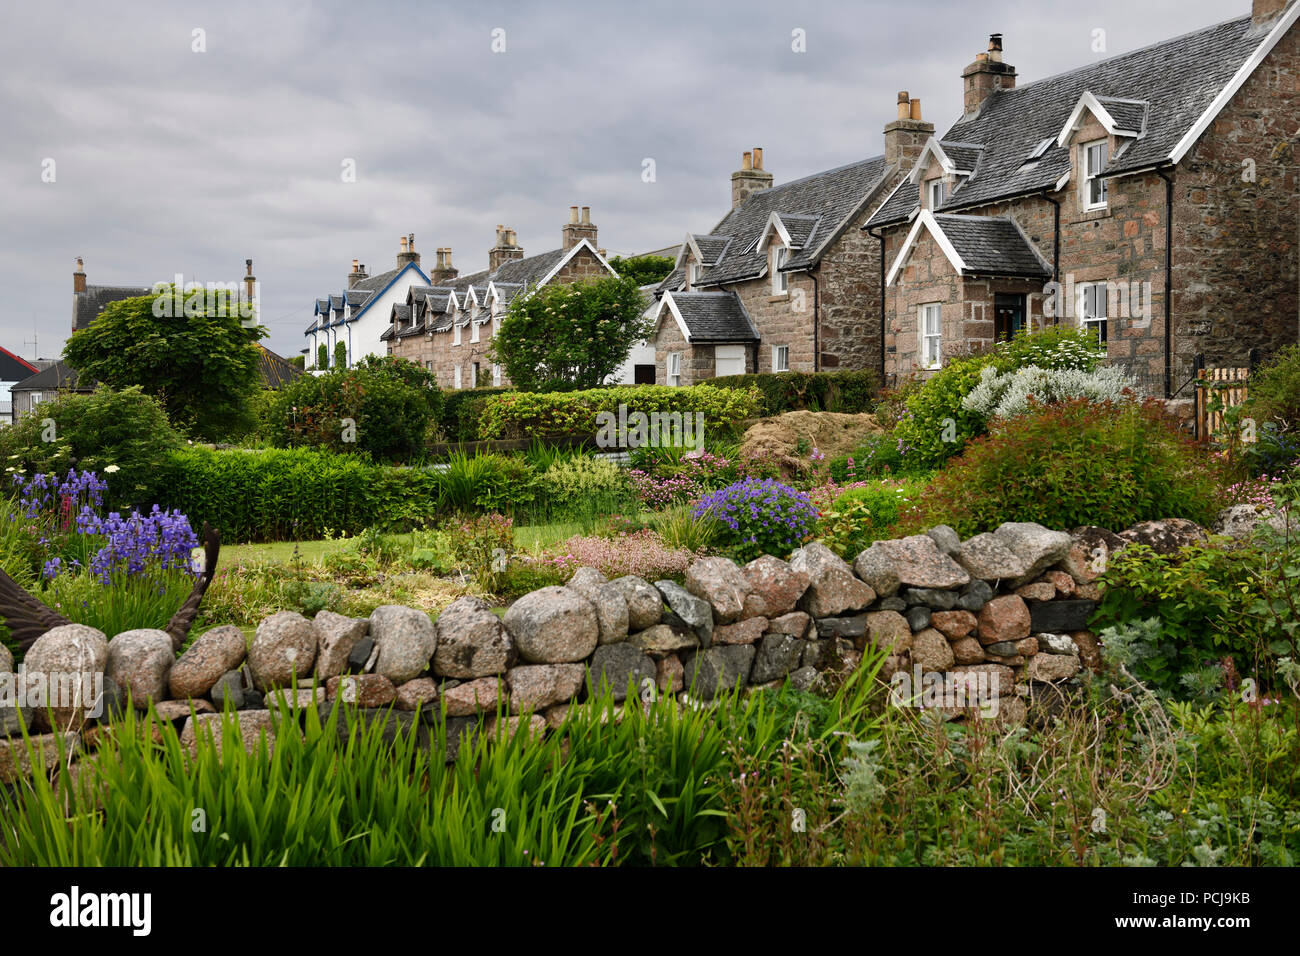 Flower gardens under cloudy sky with stone houses of Baile Mor village on Isle of Iona Scotland UK Stock Photo